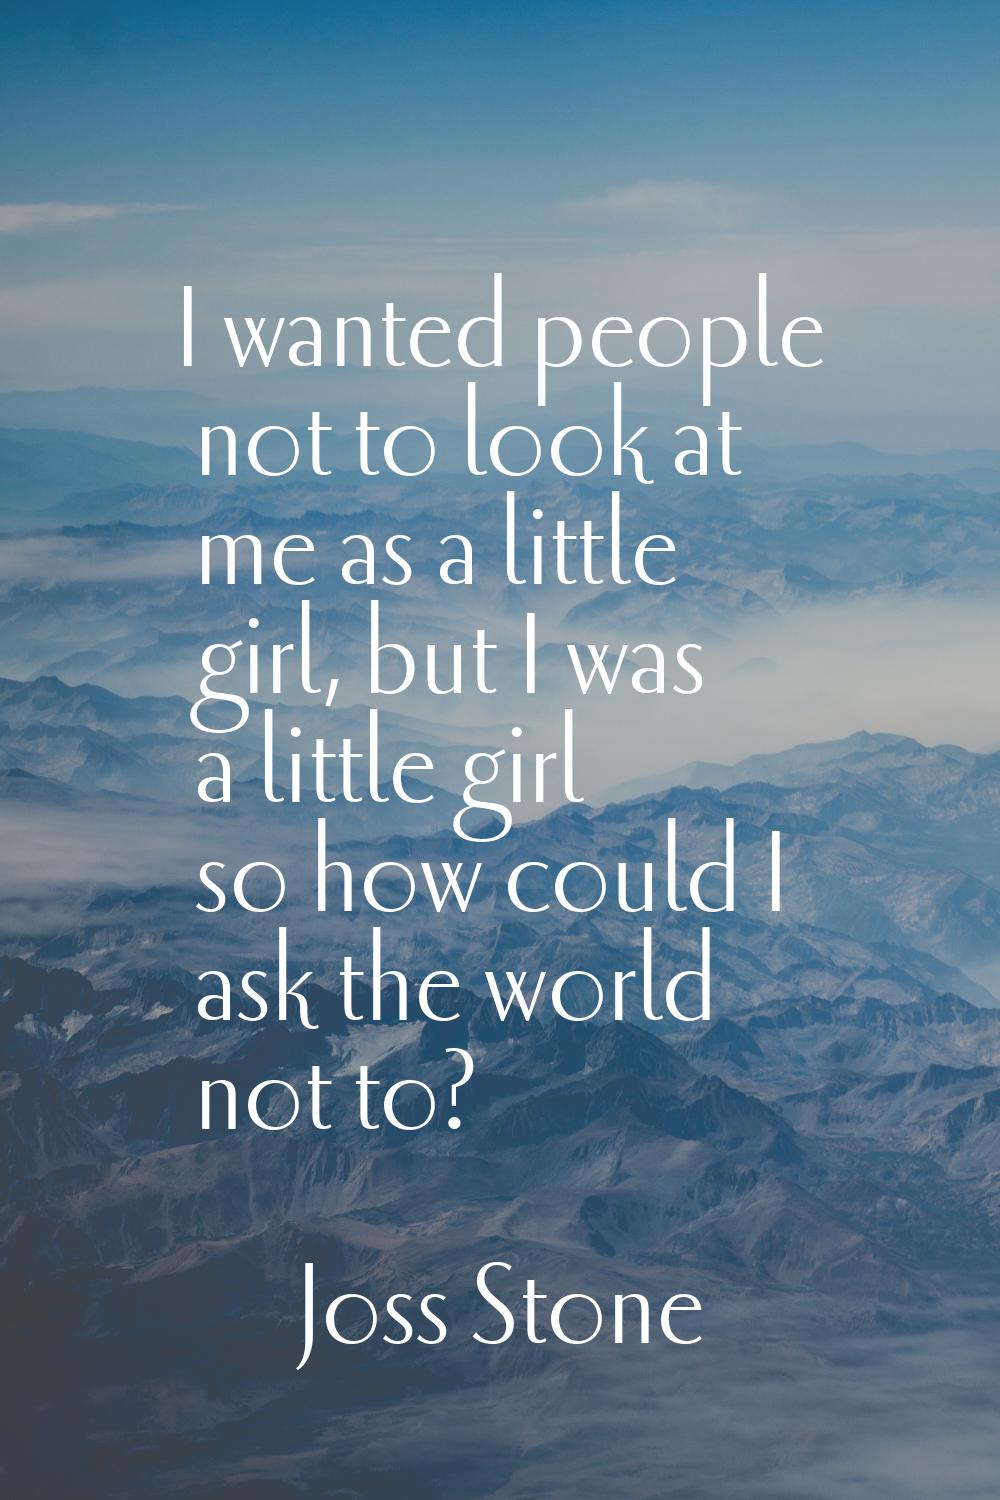 I wanted people not to look at me as a little girl, but I was a little girl so how could I ask the 